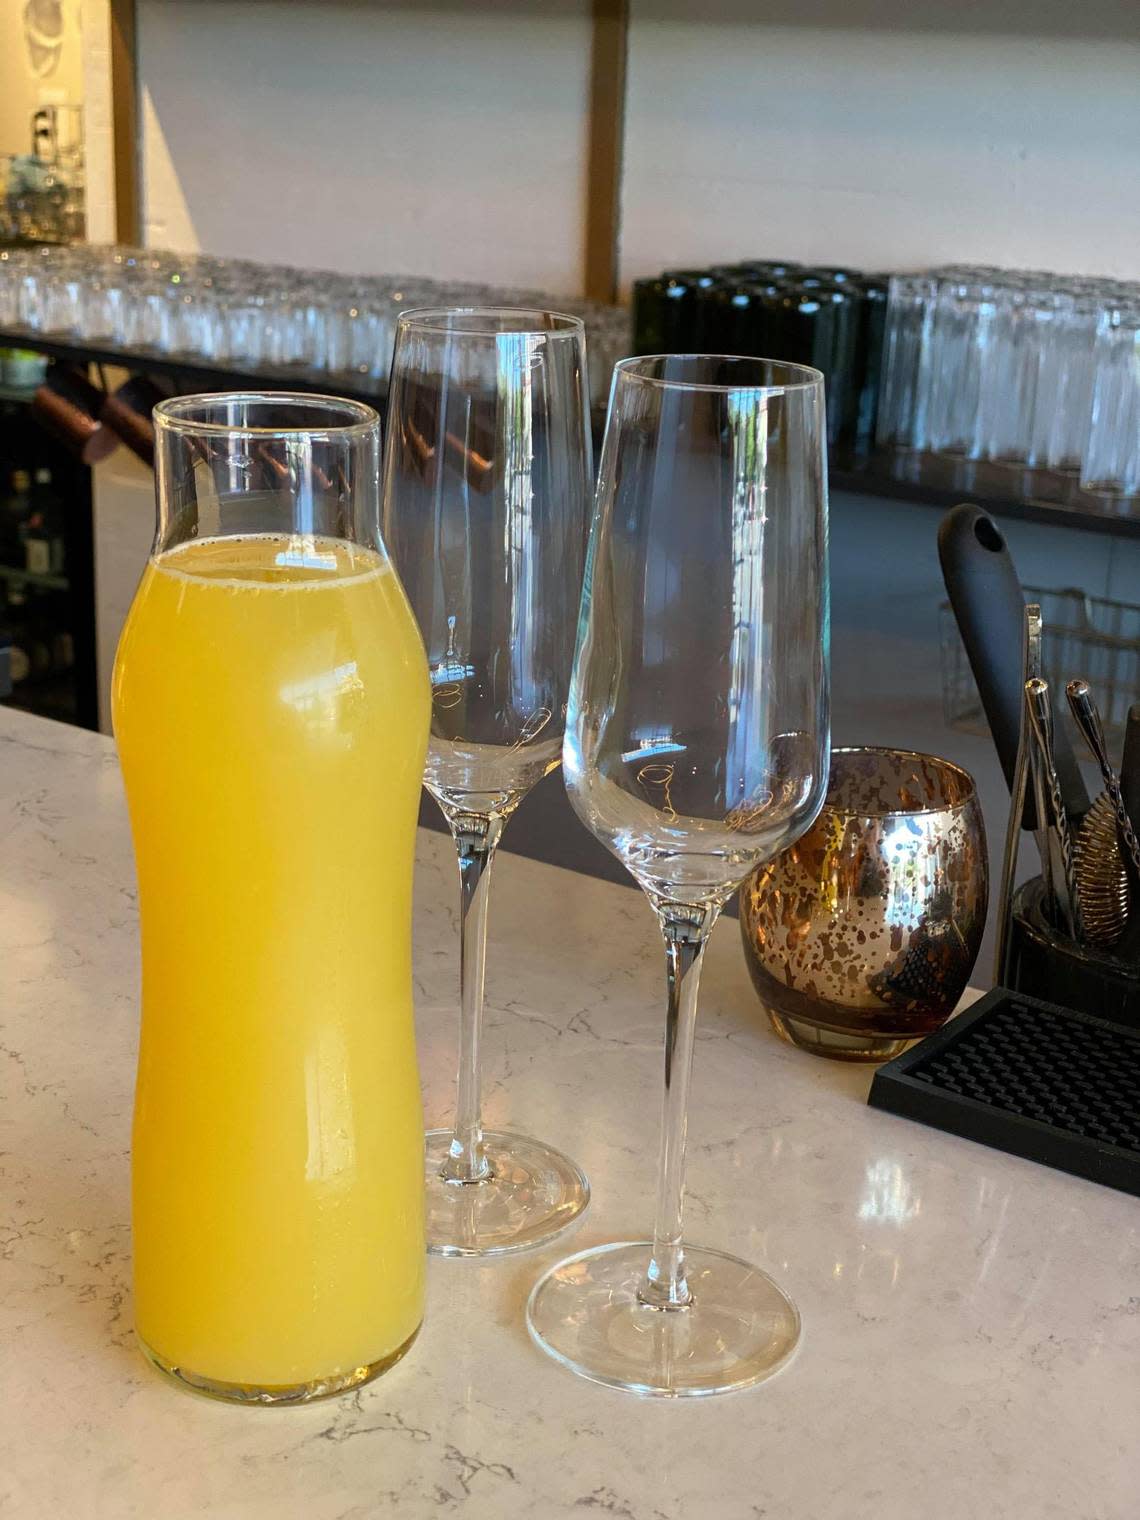 Kinjo Kitchen + Cocktails is doing brunch on Saturday and Sunday including bottomless mimosas